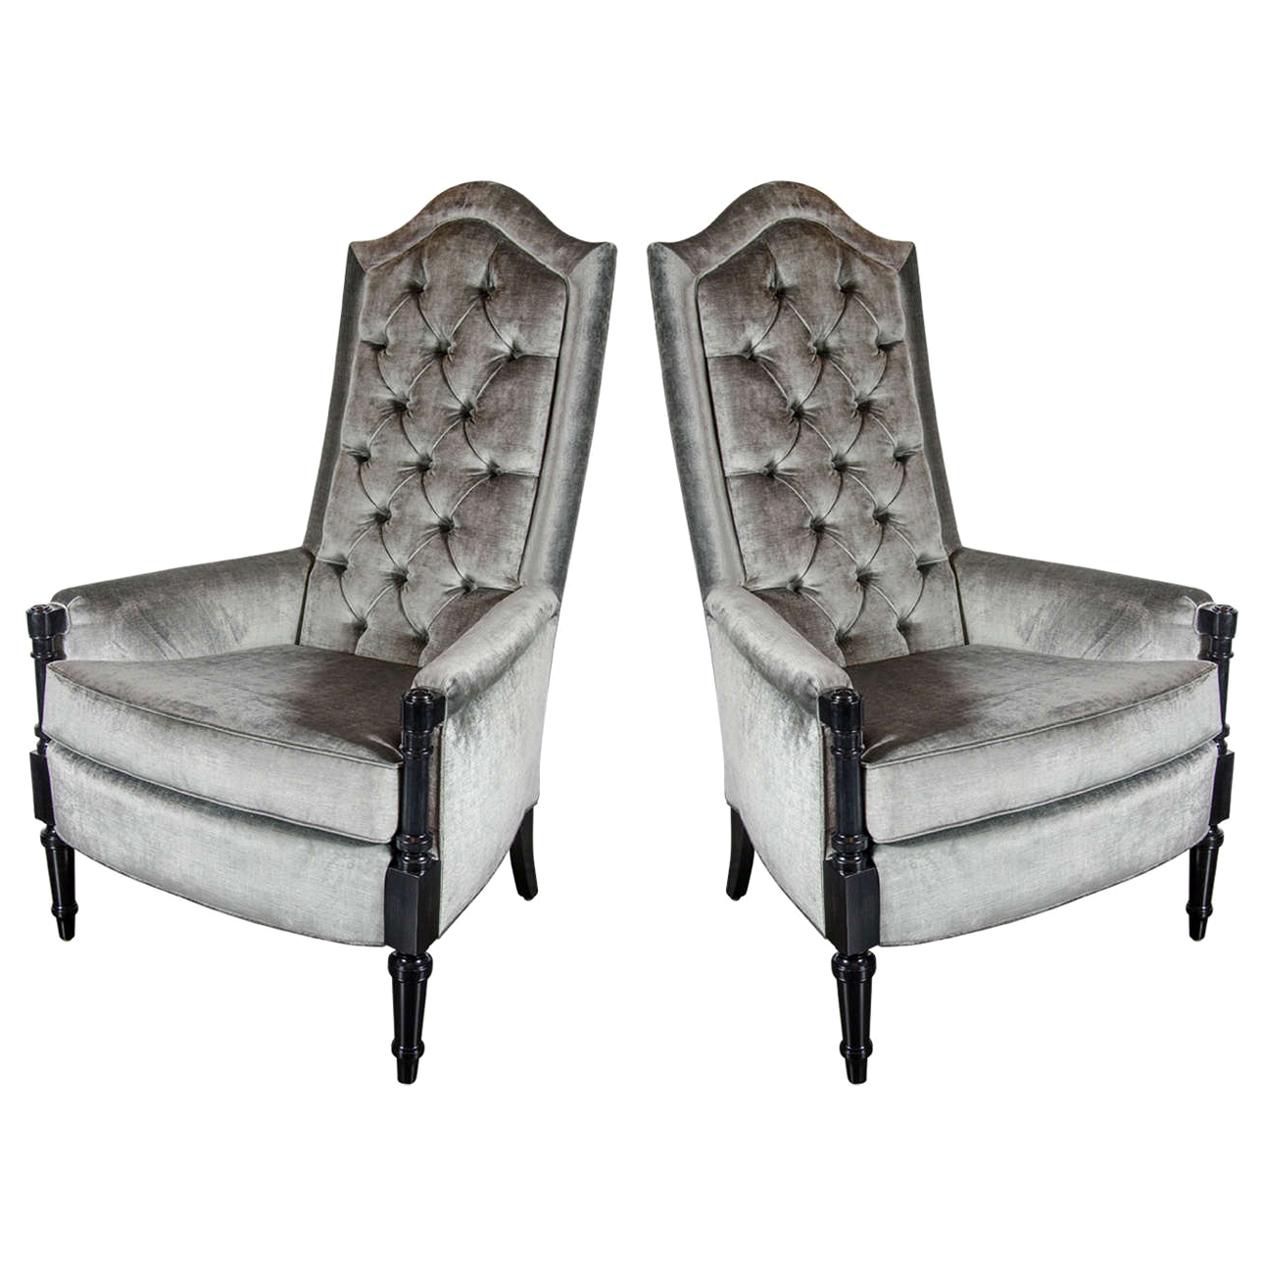 Pair of Mid-Century Modernist Occasional Chairs in the Manner of James Mont